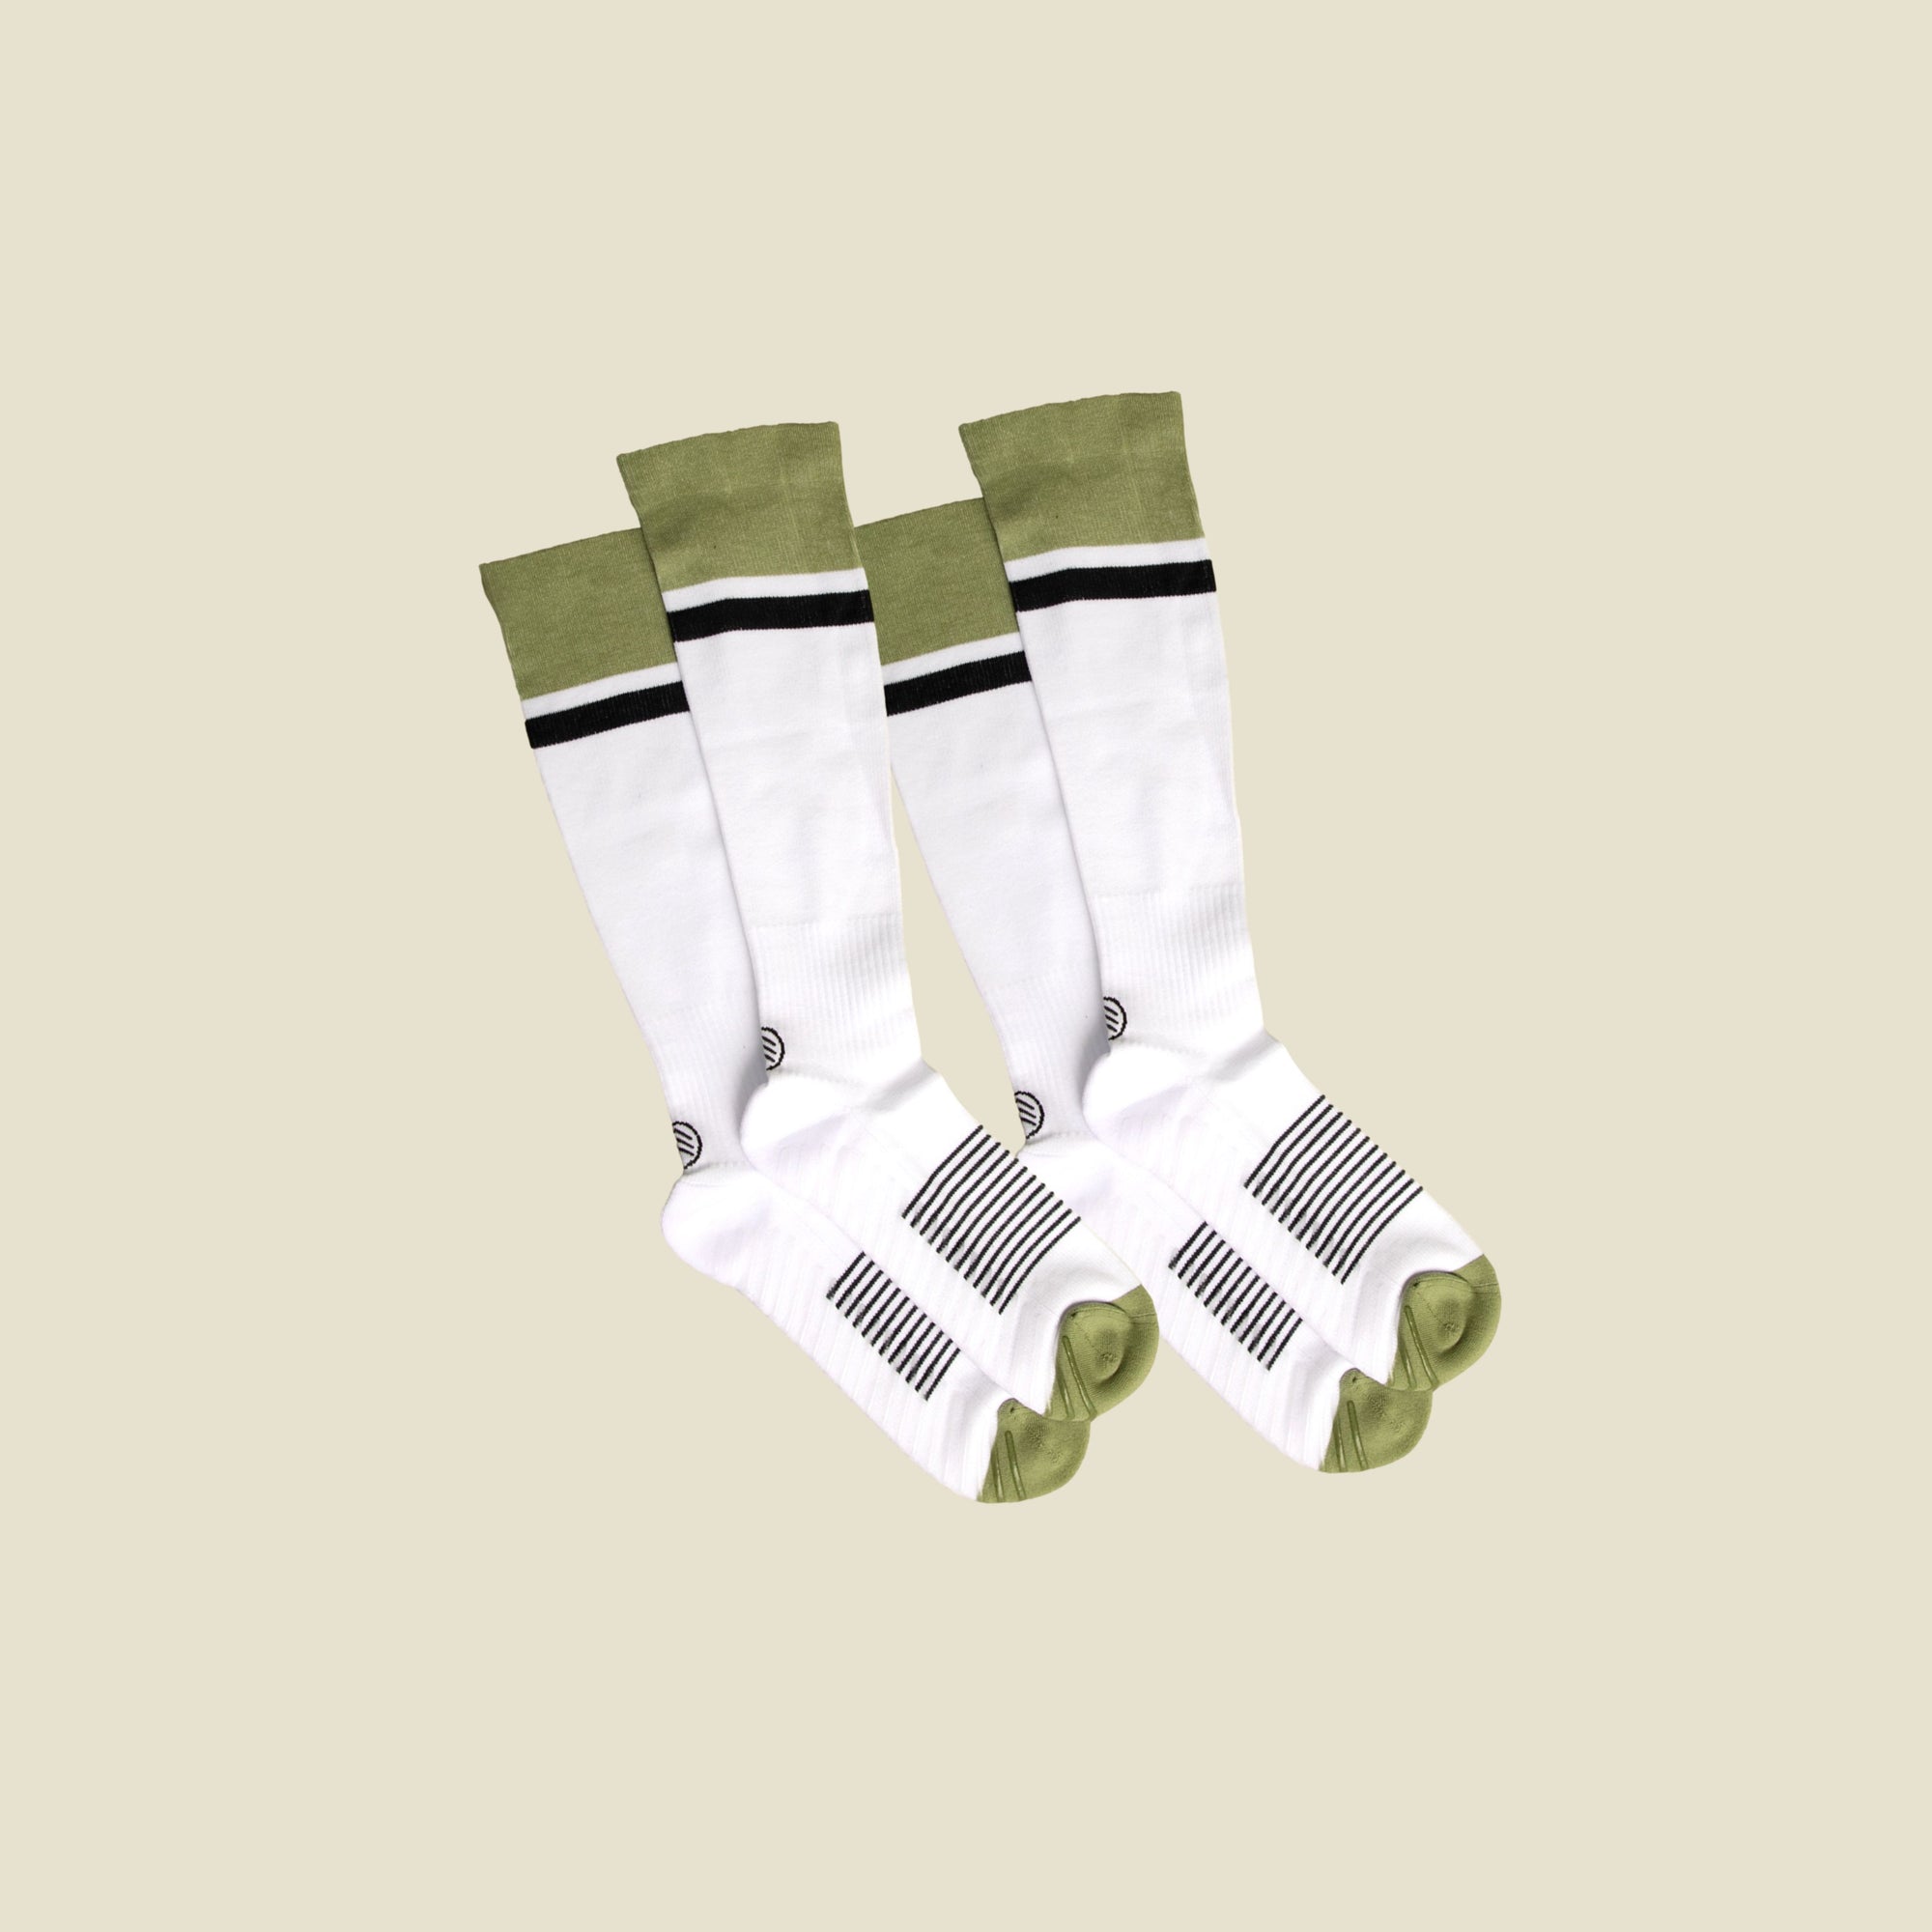 Women's White/Black/Green Compression Socks with Grips - 2 Pairs - Gripjoy Socks